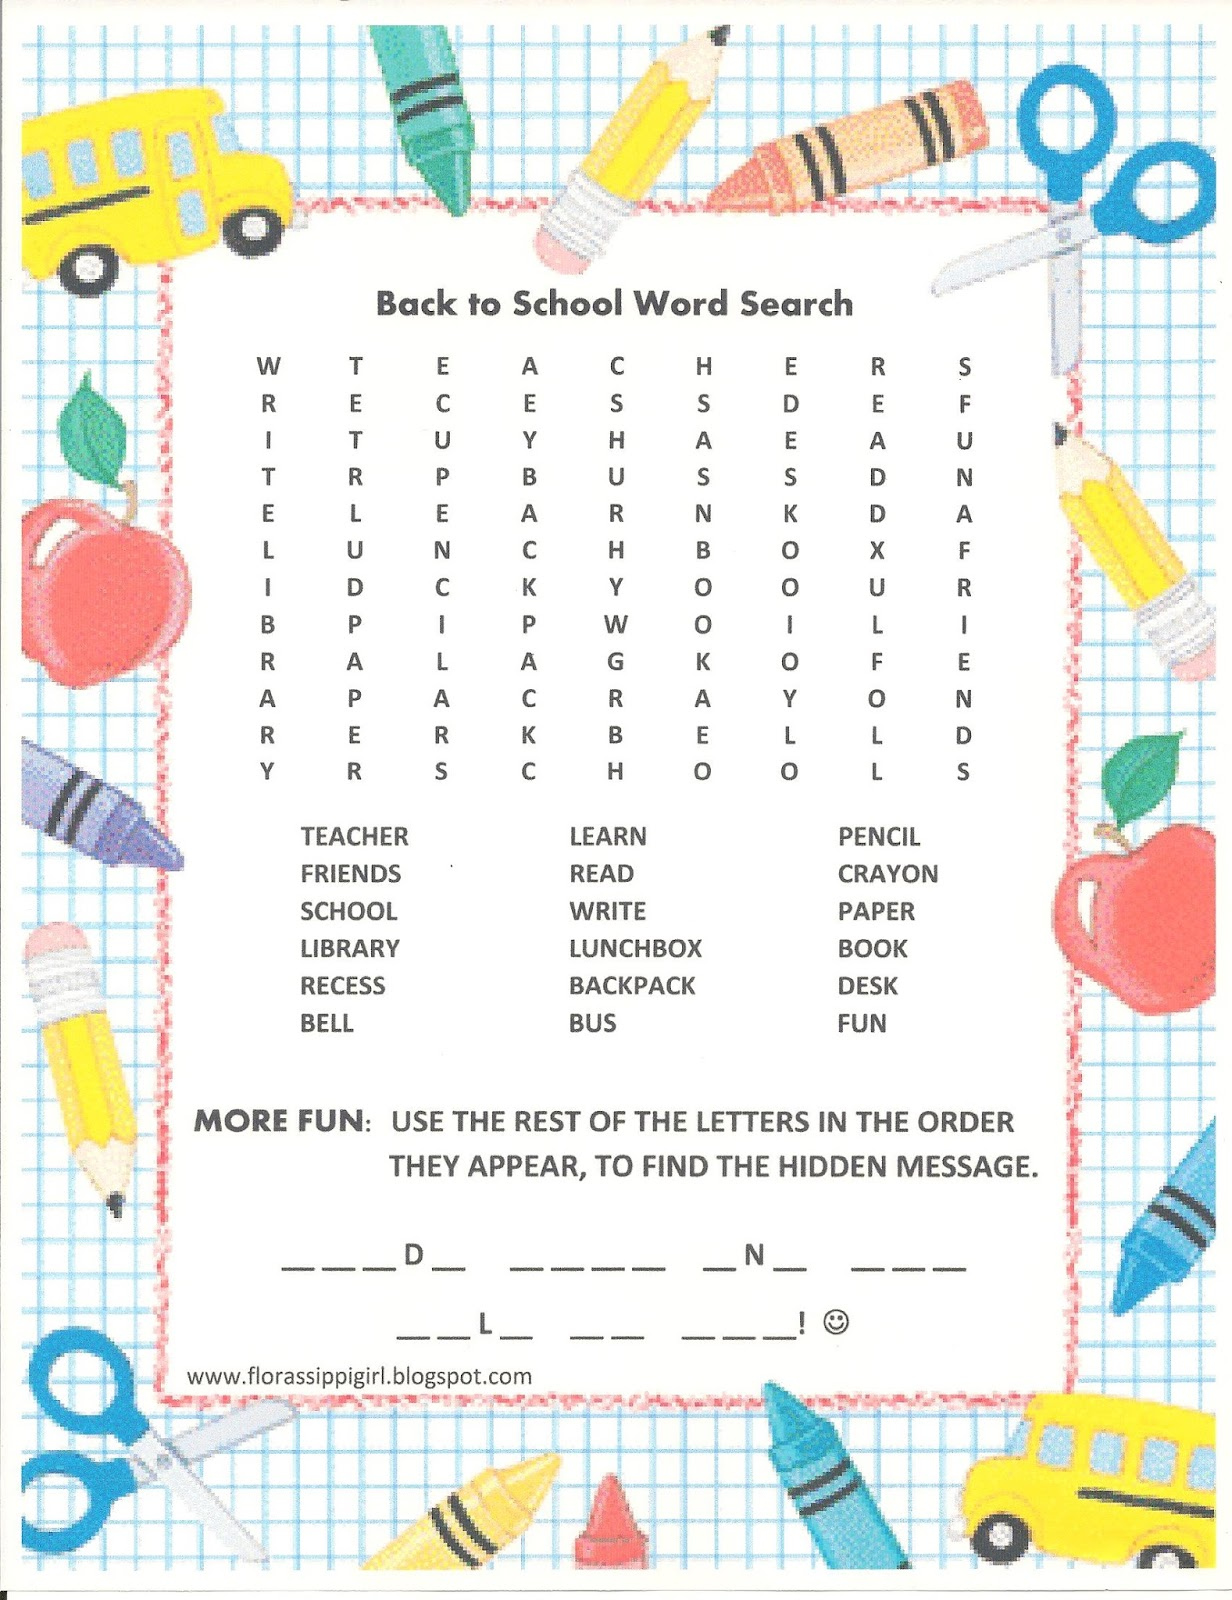 Florassippi Girl Back To School Word Search Free Printable